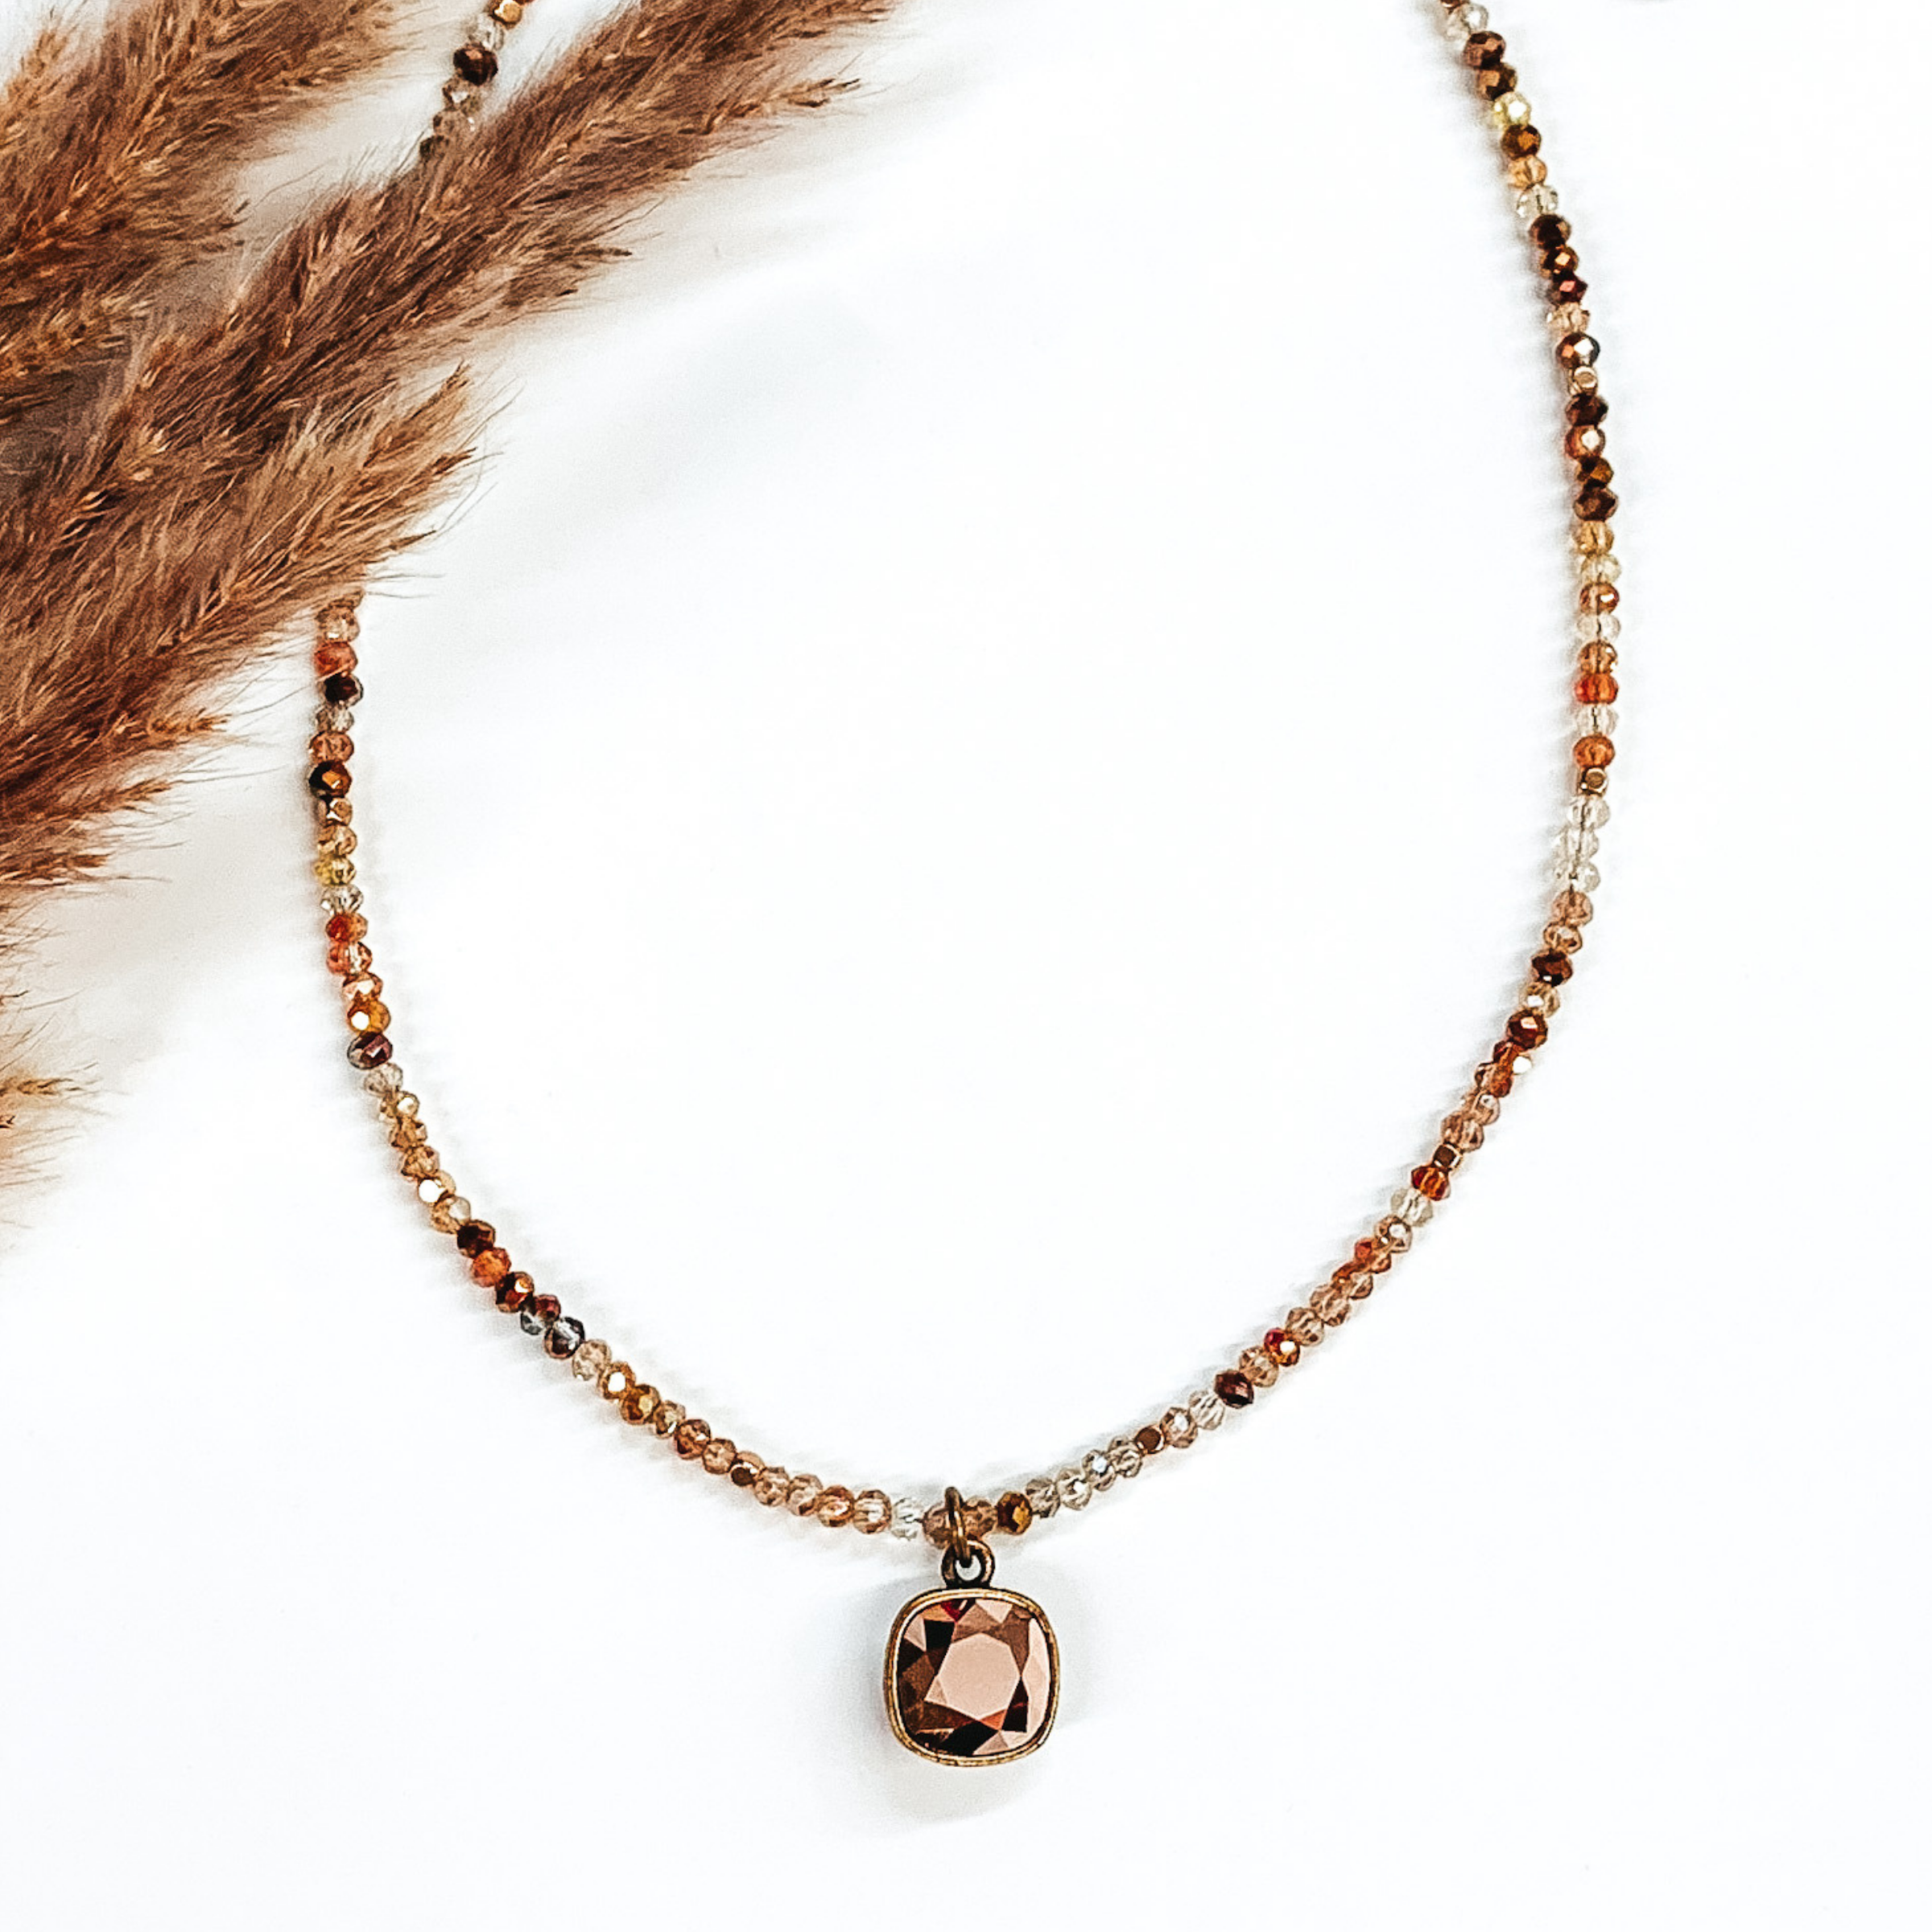 Rose gold and bronze mix beaded adjustable necklace with a single square crystal in a rose gold color. This necklace is pictured of a white background with some brown floral.